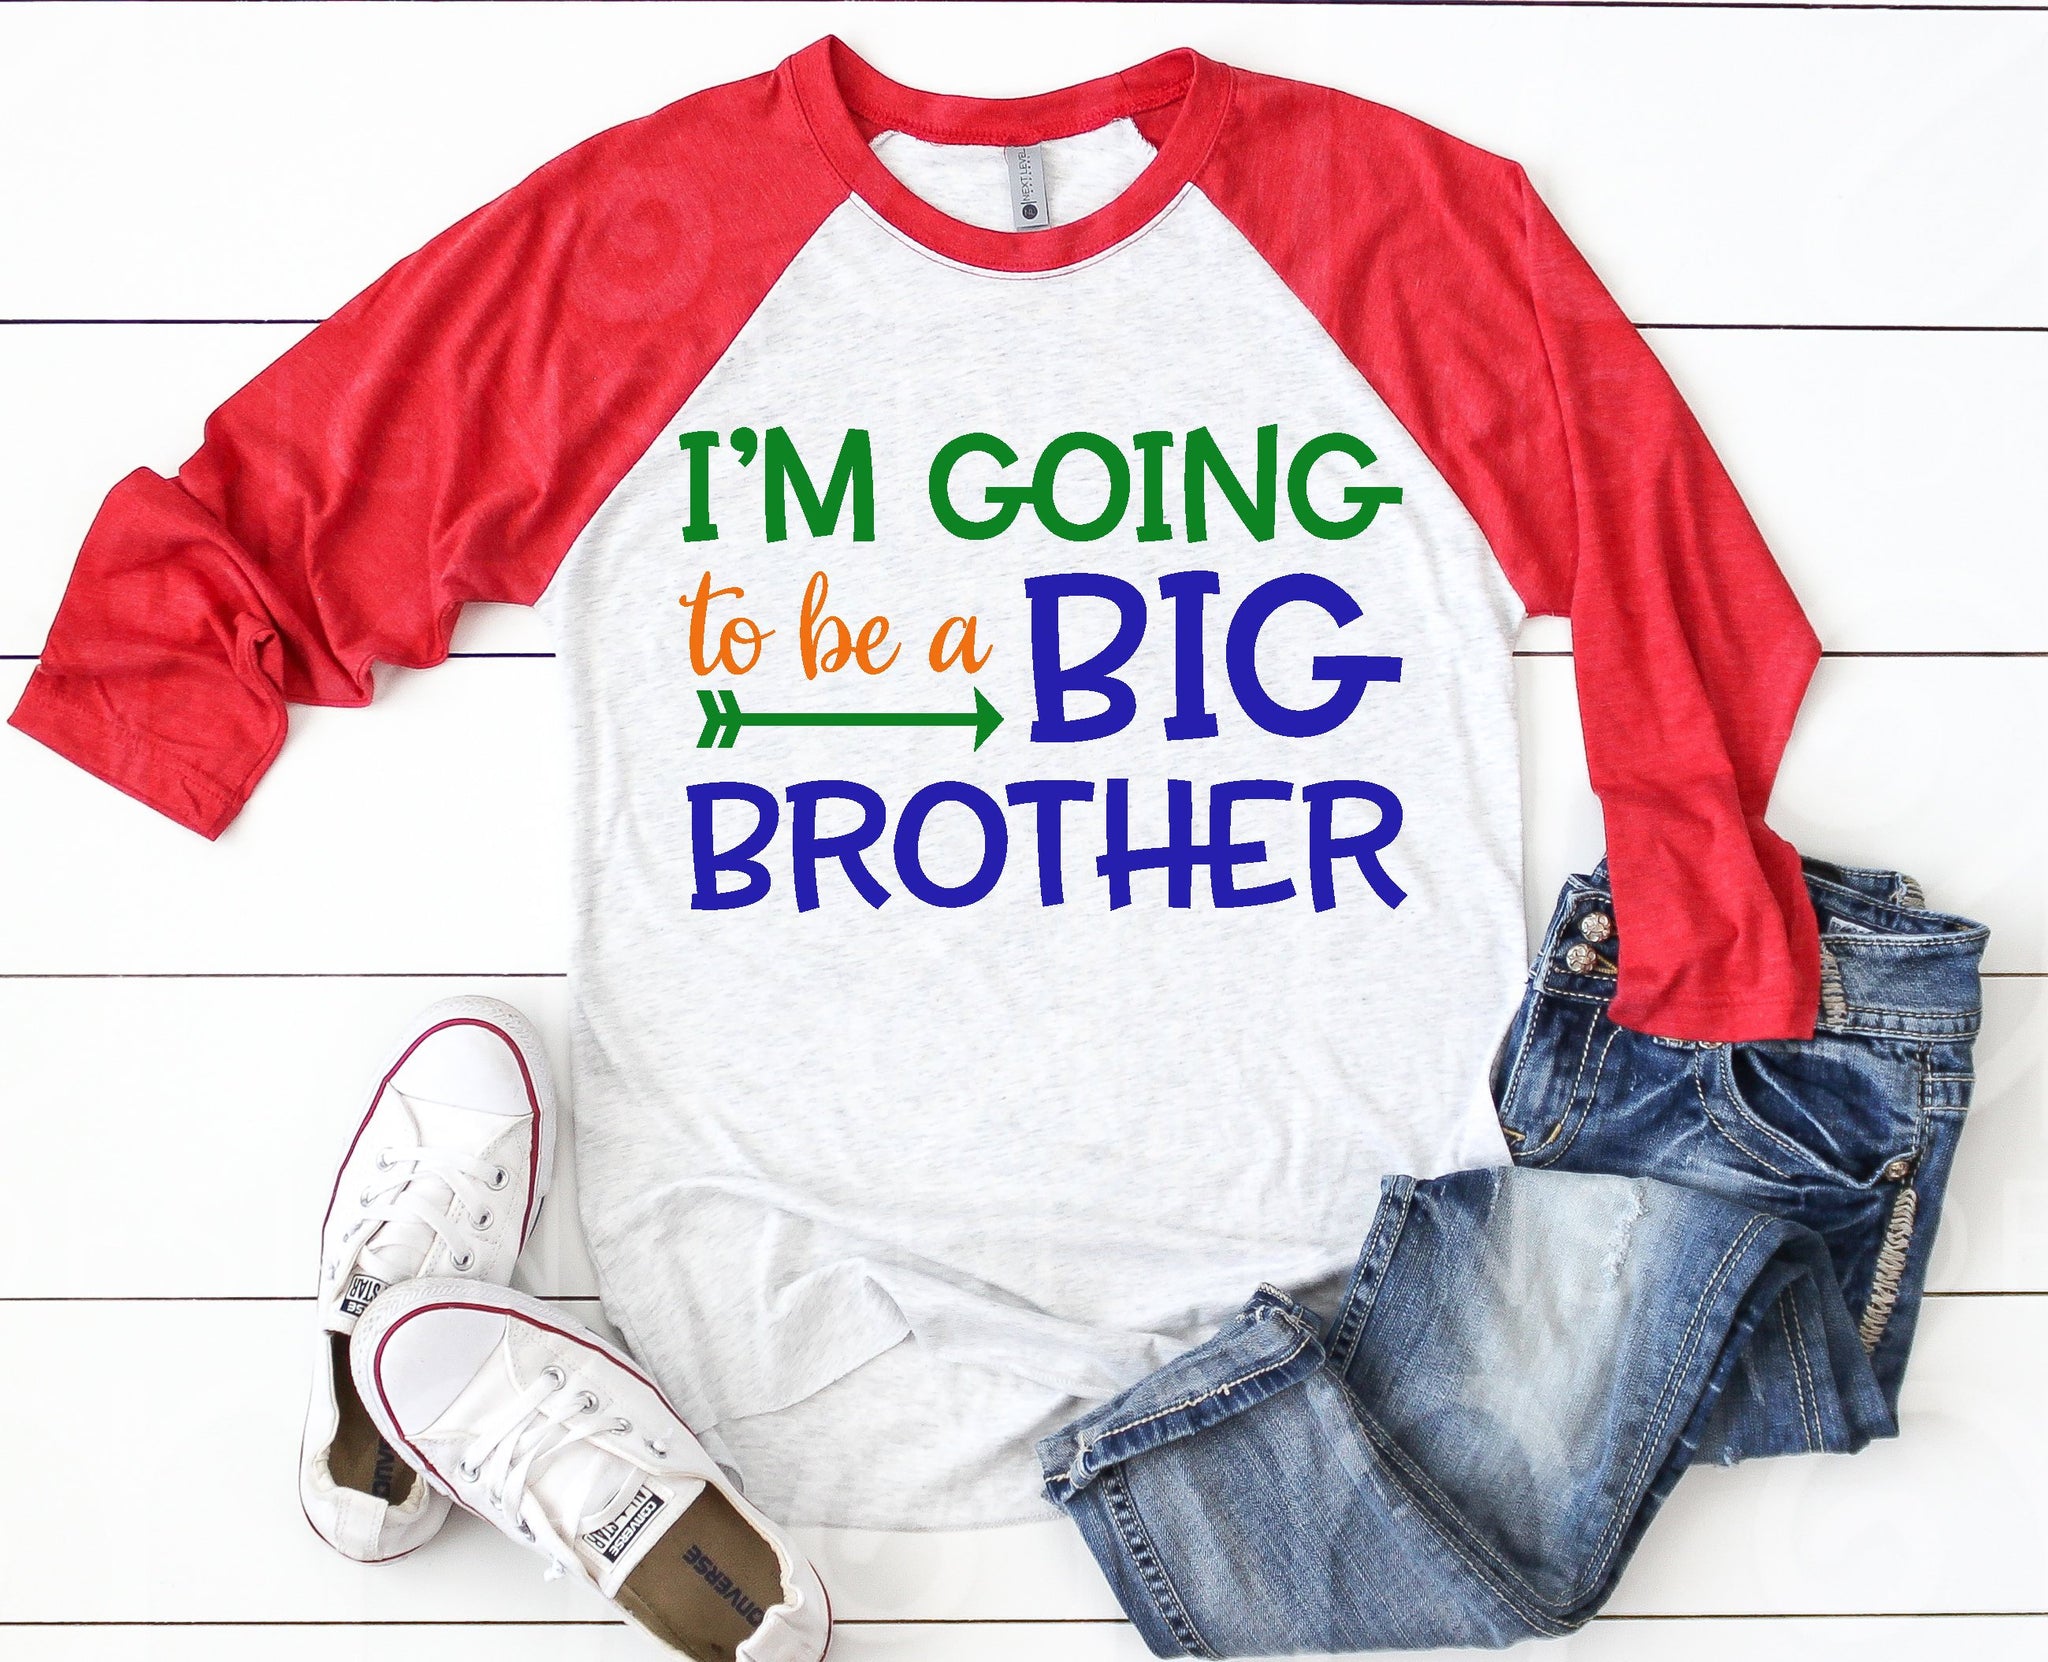 Big brother, big brother svg, baby announcement svg, going to be a big brother